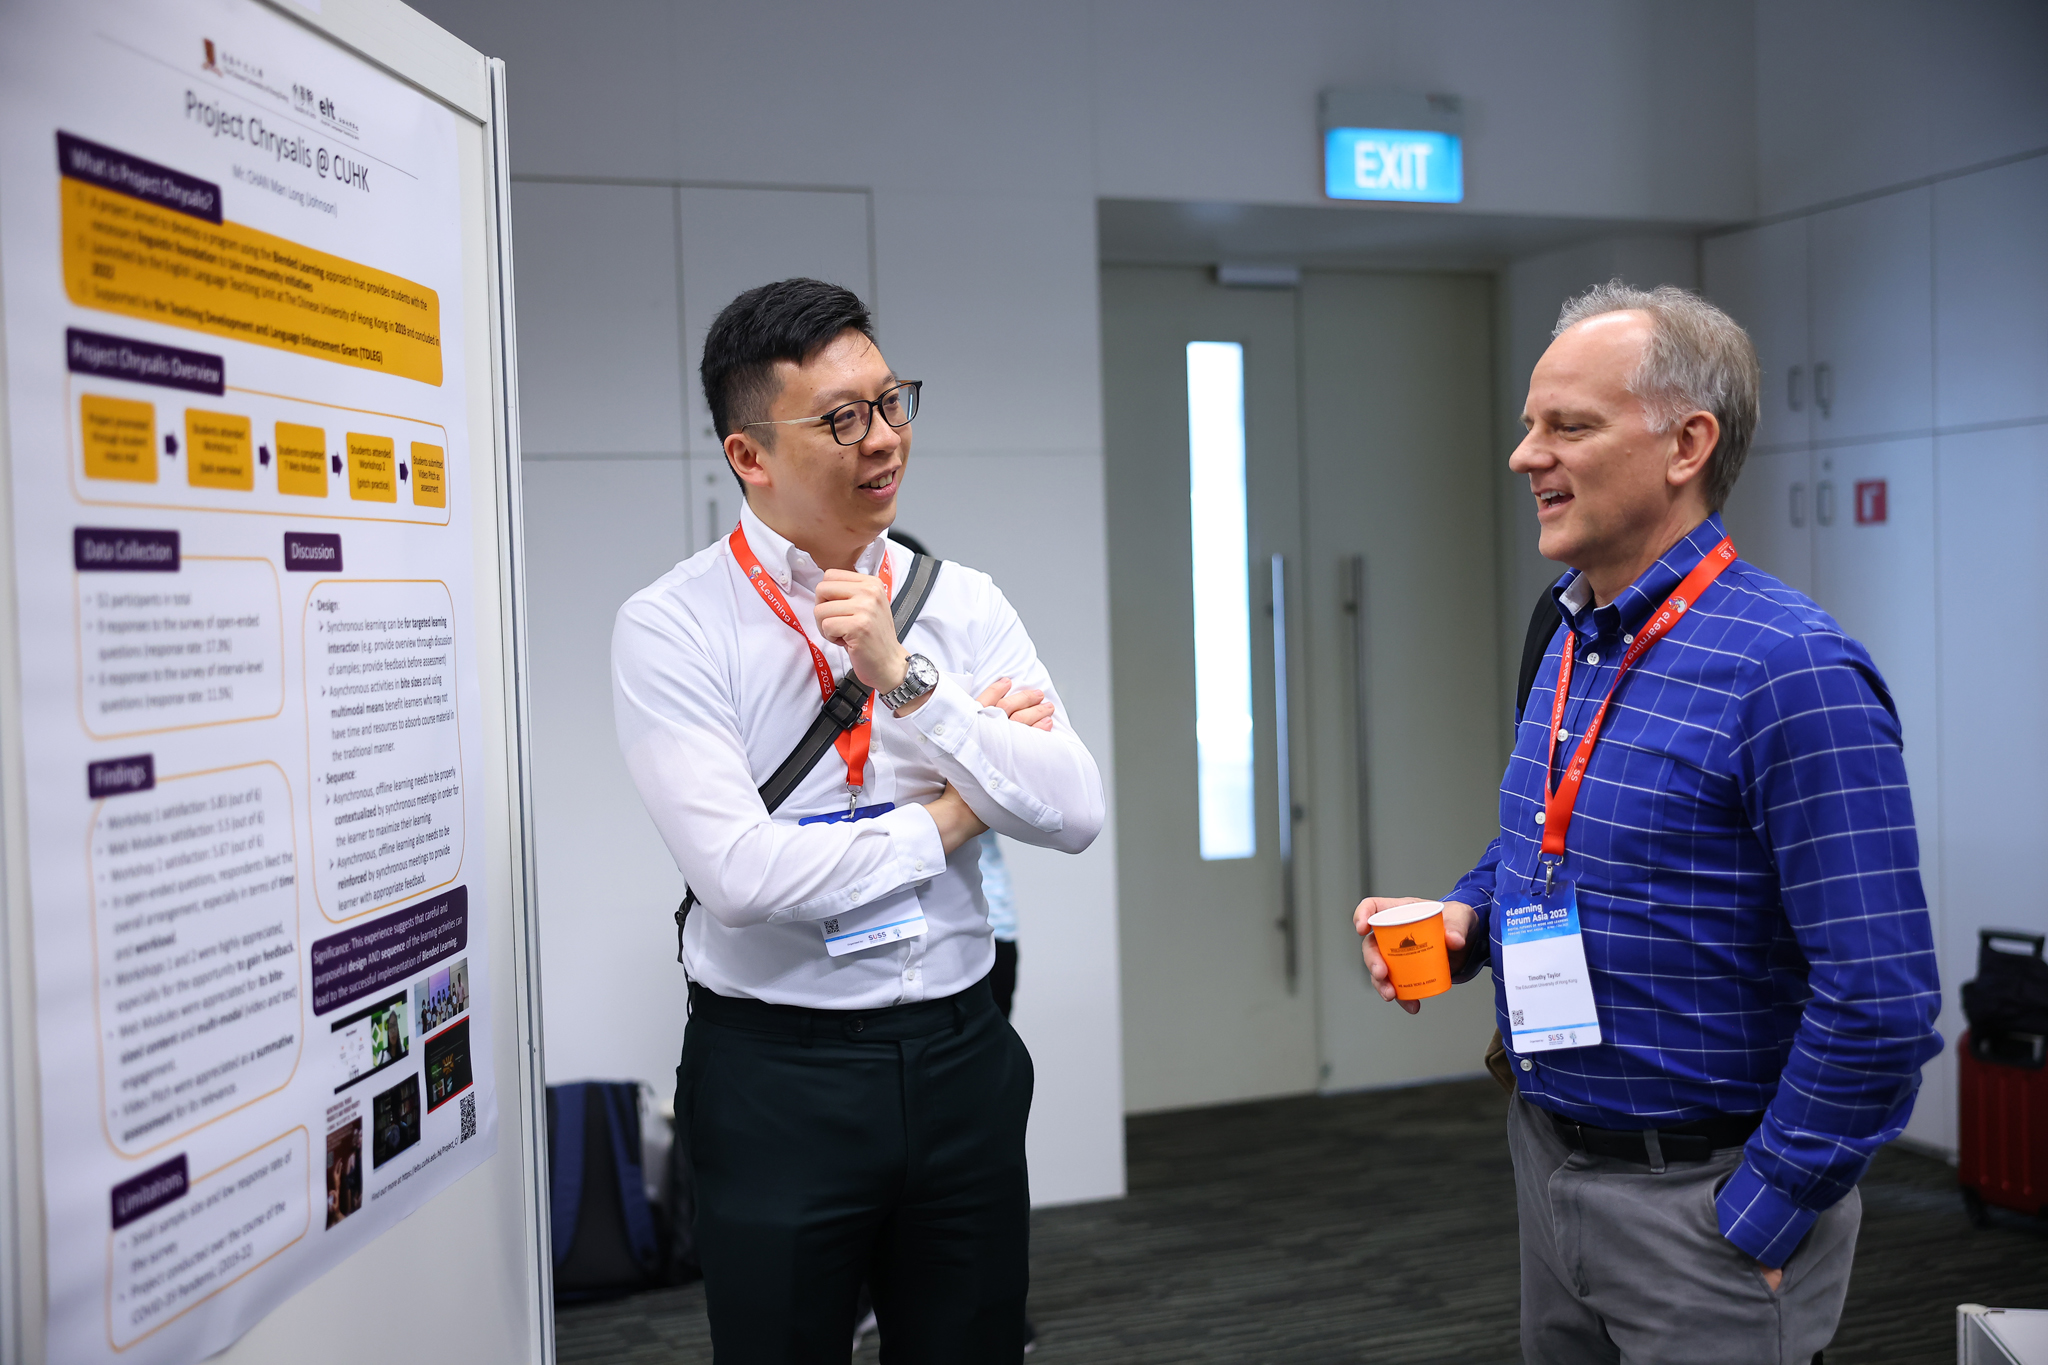 Dr Taylor is discussing the poster presentation delivered by Mr Chan from The Chinese University of Hong Kong